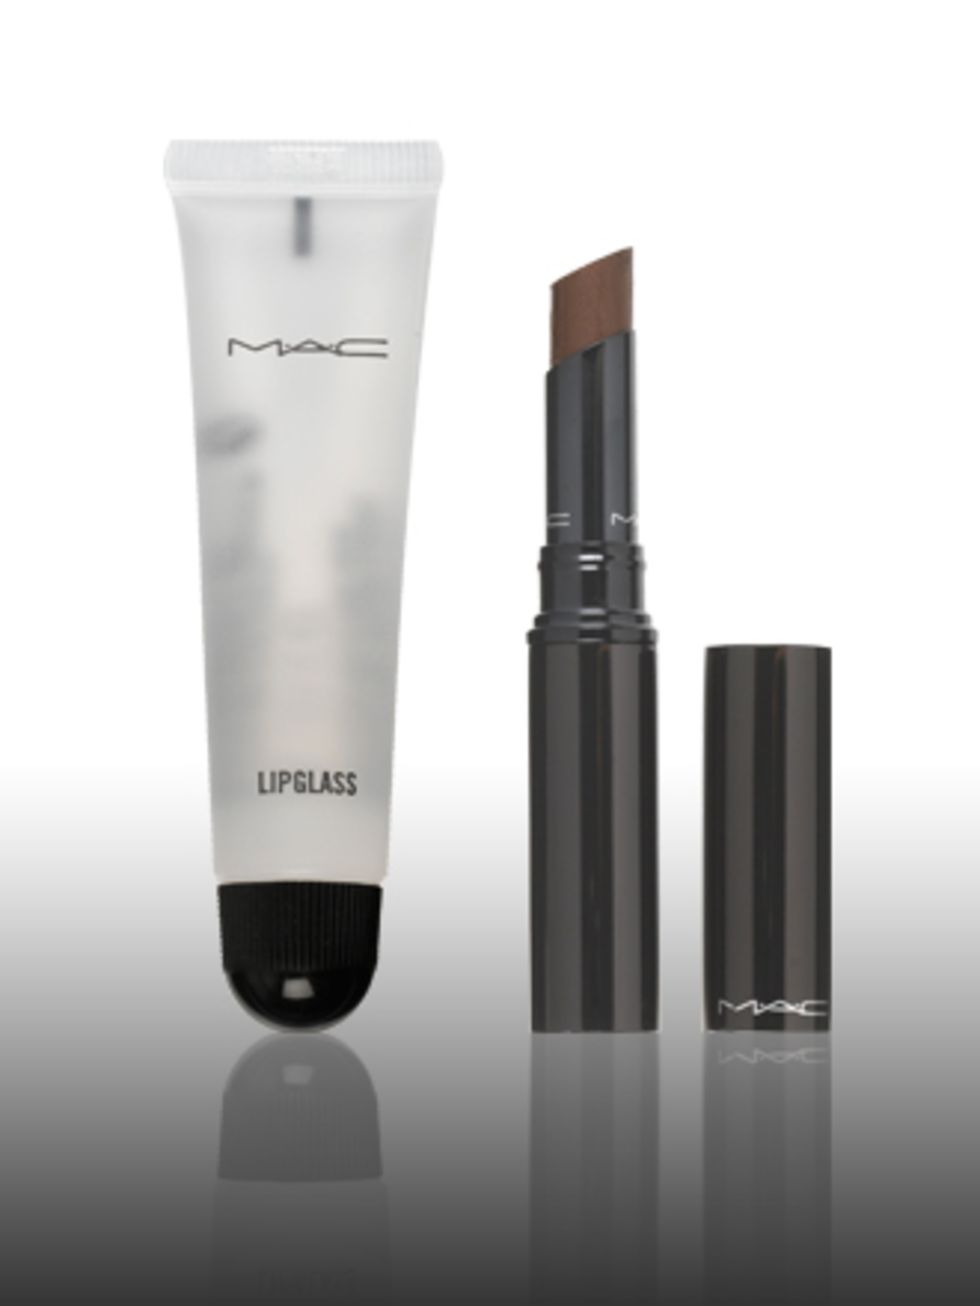 <p>Clear Lipglass, £9.50 and Mattene Lipstick in Chock-ful Blackened Brown, £11.50 by <a href="http://www.maccosmetics.co.uk/templates/products/category.tmpl?CATEGORY_ID=CAT3726">Mac</a> </p><p><a href="http://www.elleuk.com/beauty/beauty-trends/berry-lip